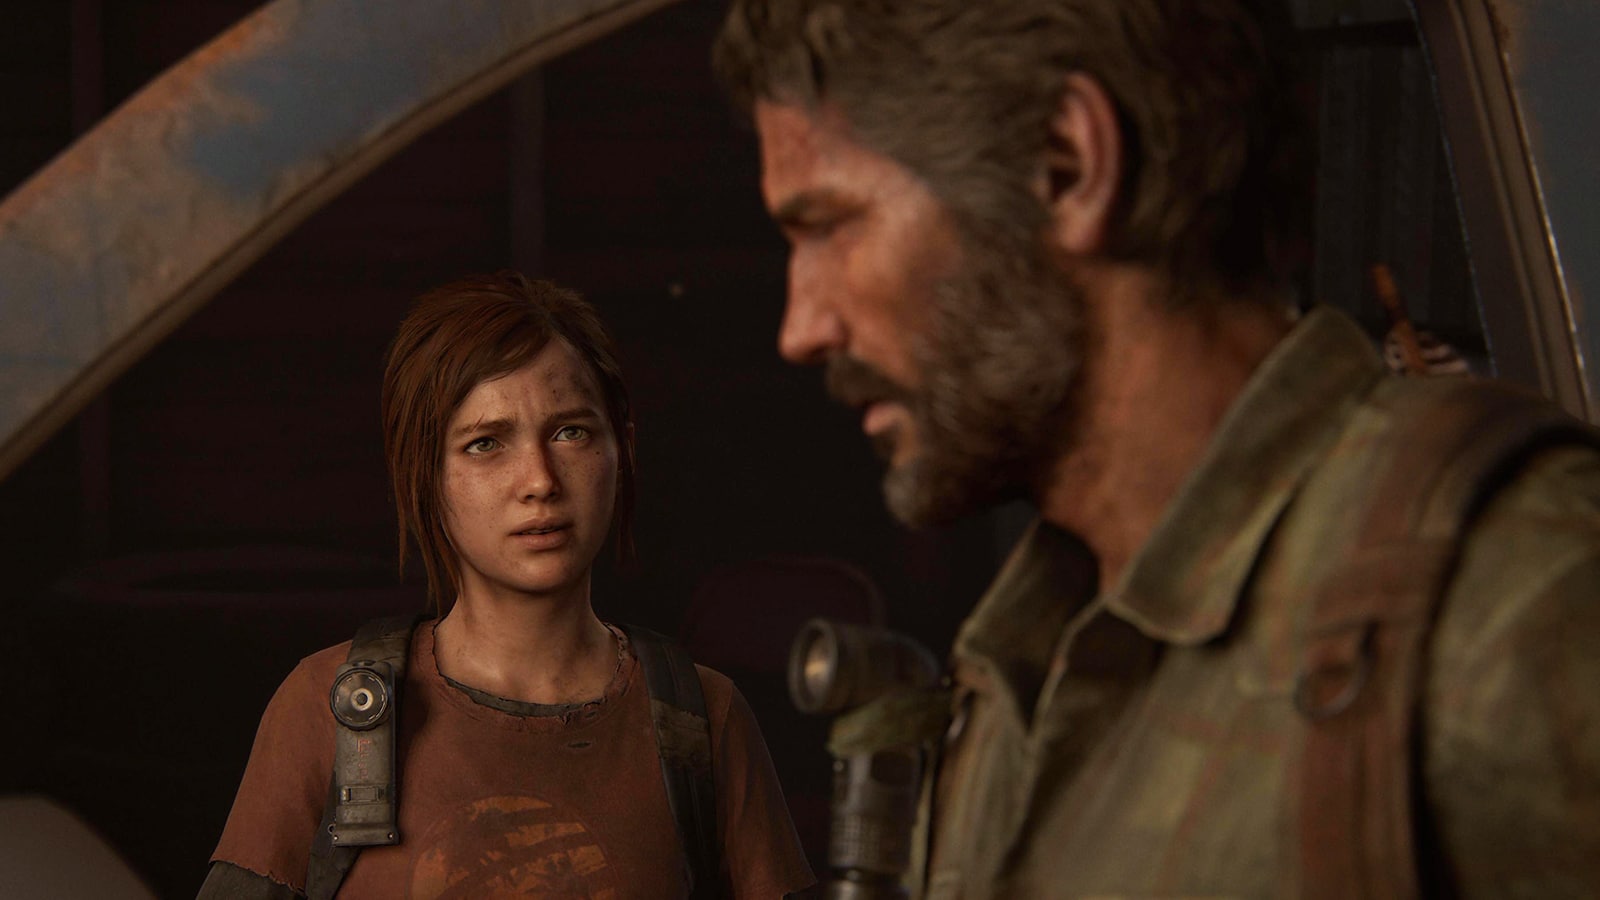 The Last of Us Part 1 PC v1.1 patch notes: Performance improvements, Steam  Deck verified, crash fixes, and more